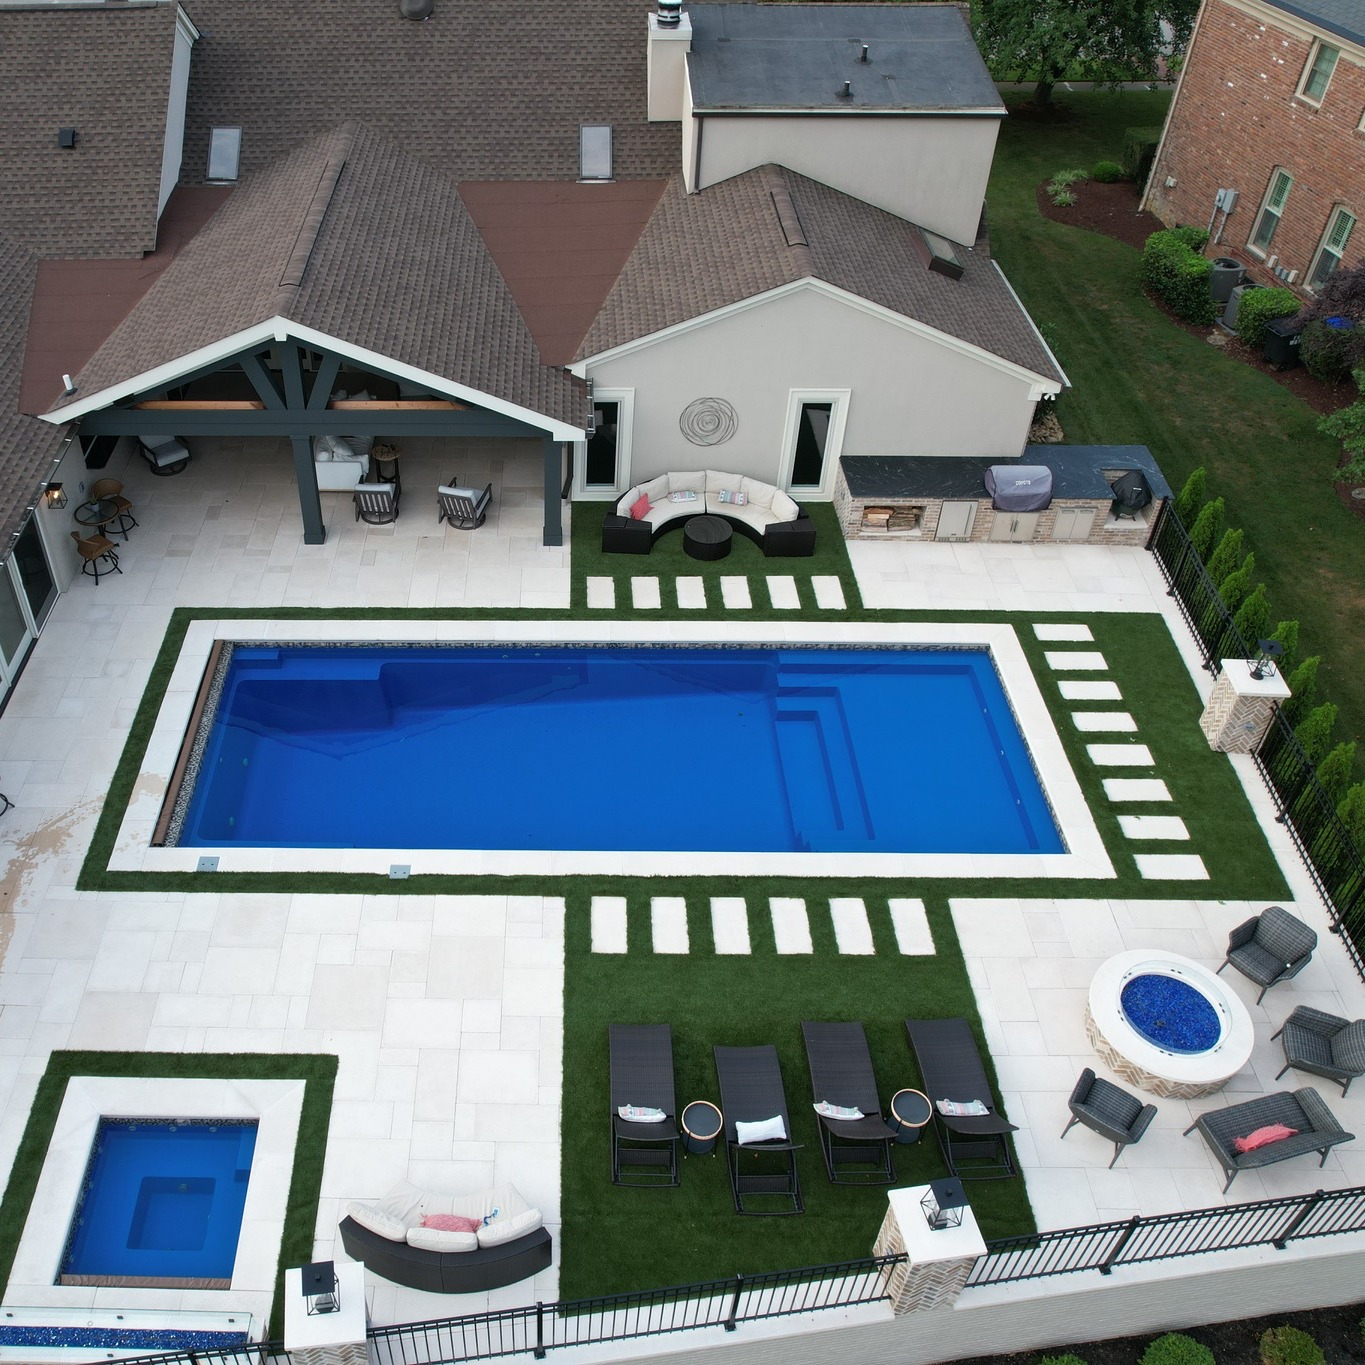 Derby City Pools Fiberglass Swimming Pools In Louisville KY